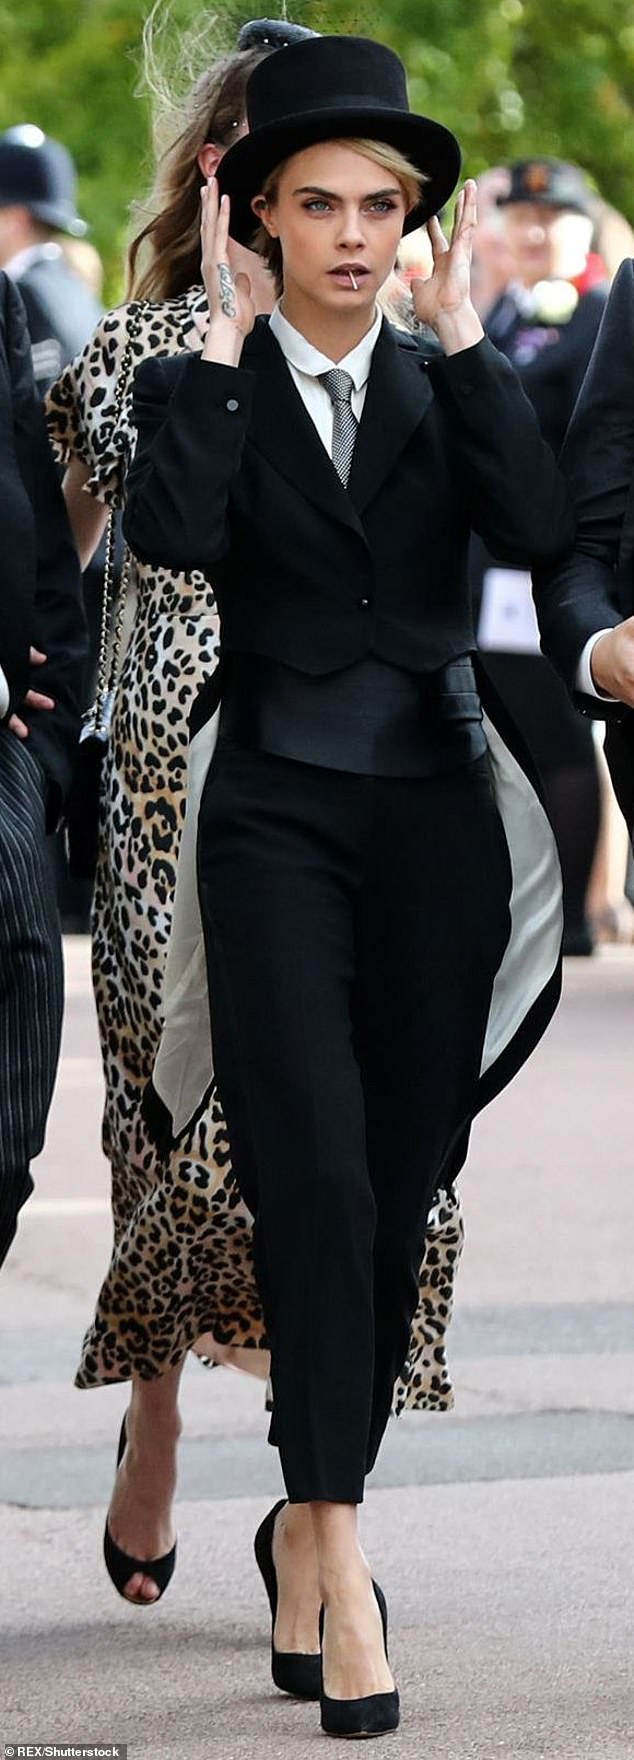 Cara Delevingne, a guest at Princess Eugenie's nuptials in 2018, completely upstaged the royal bride by appearing in a top hat and tails.